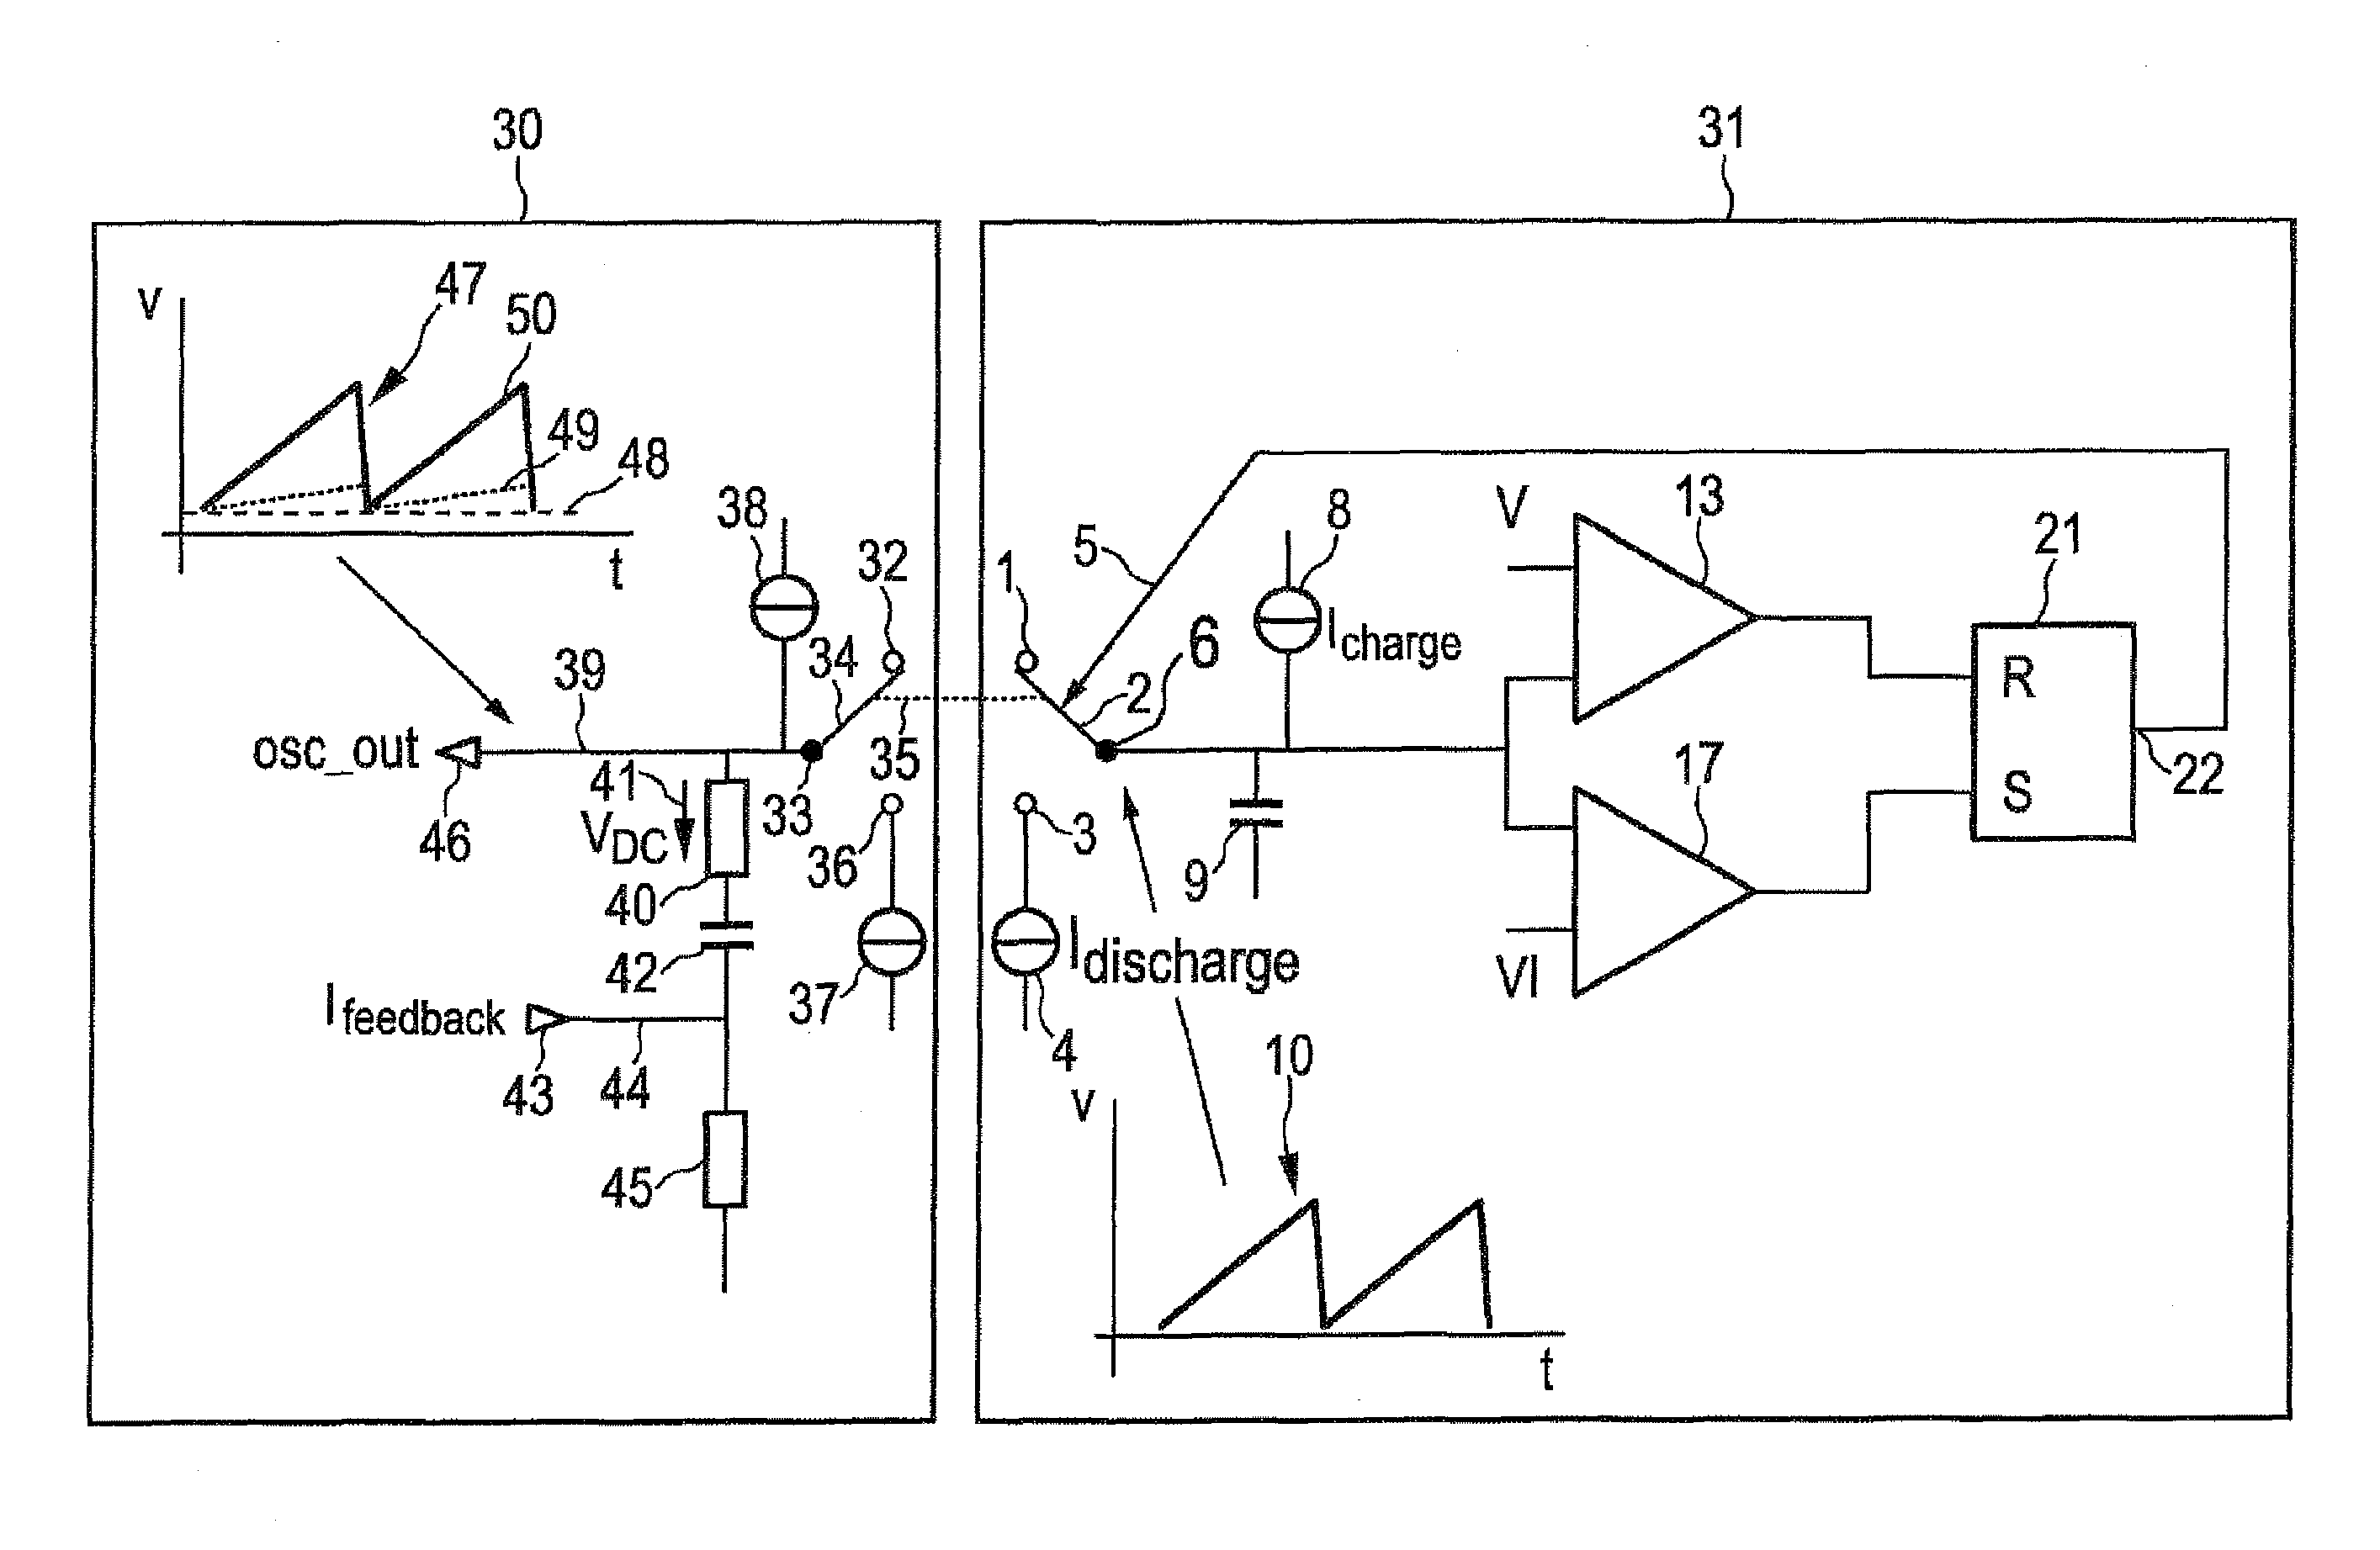 Power supply and DC-DC-conversion